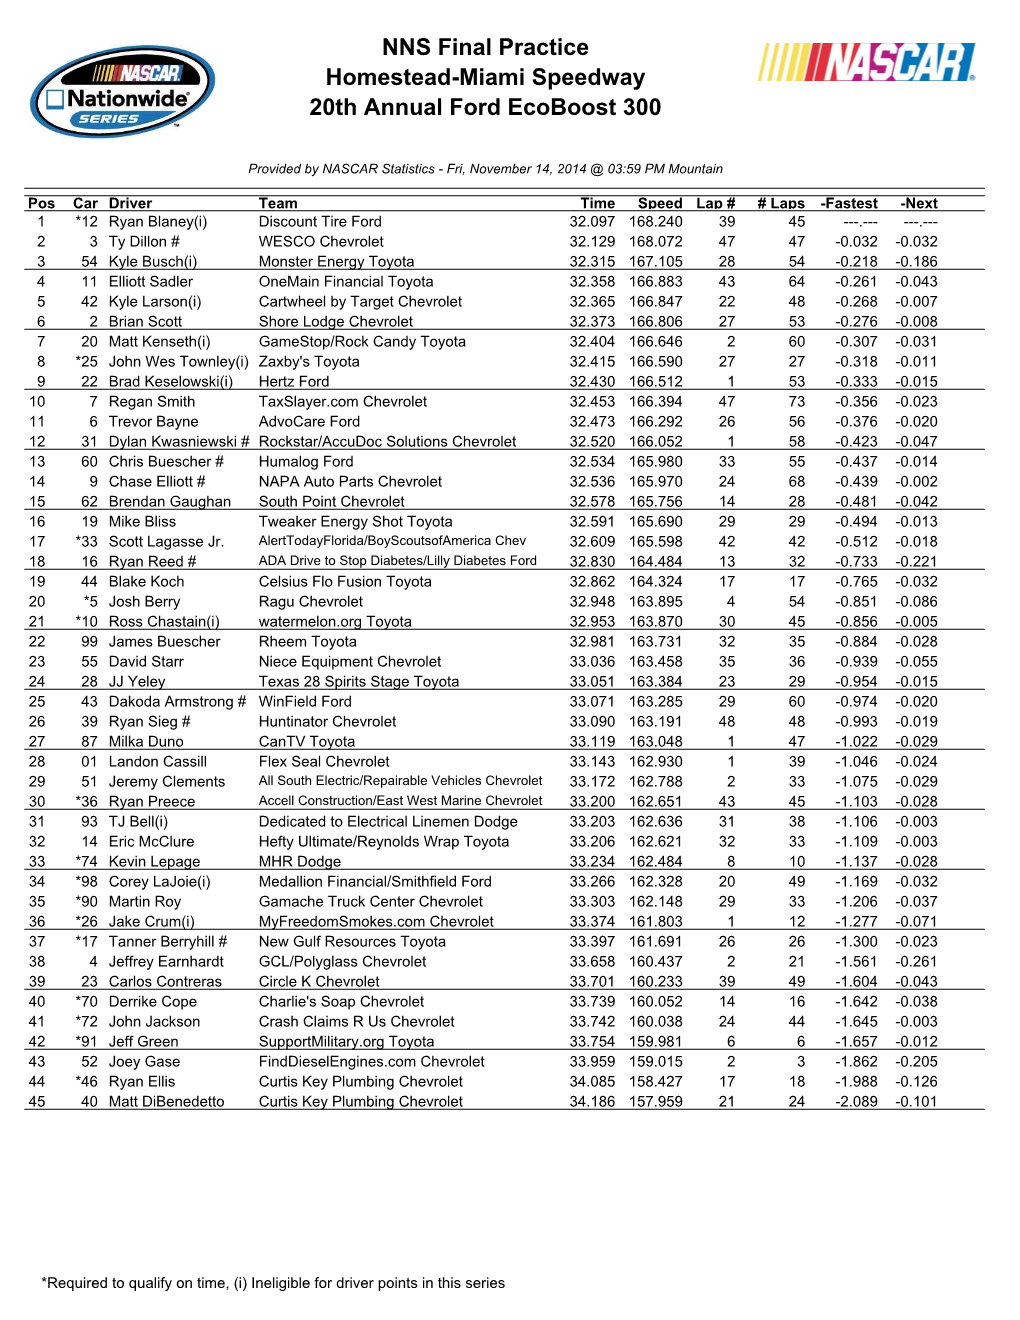 NNS Final Practice Homestead-Miami Speedway 20Th Annual Ford Ecoboost 300